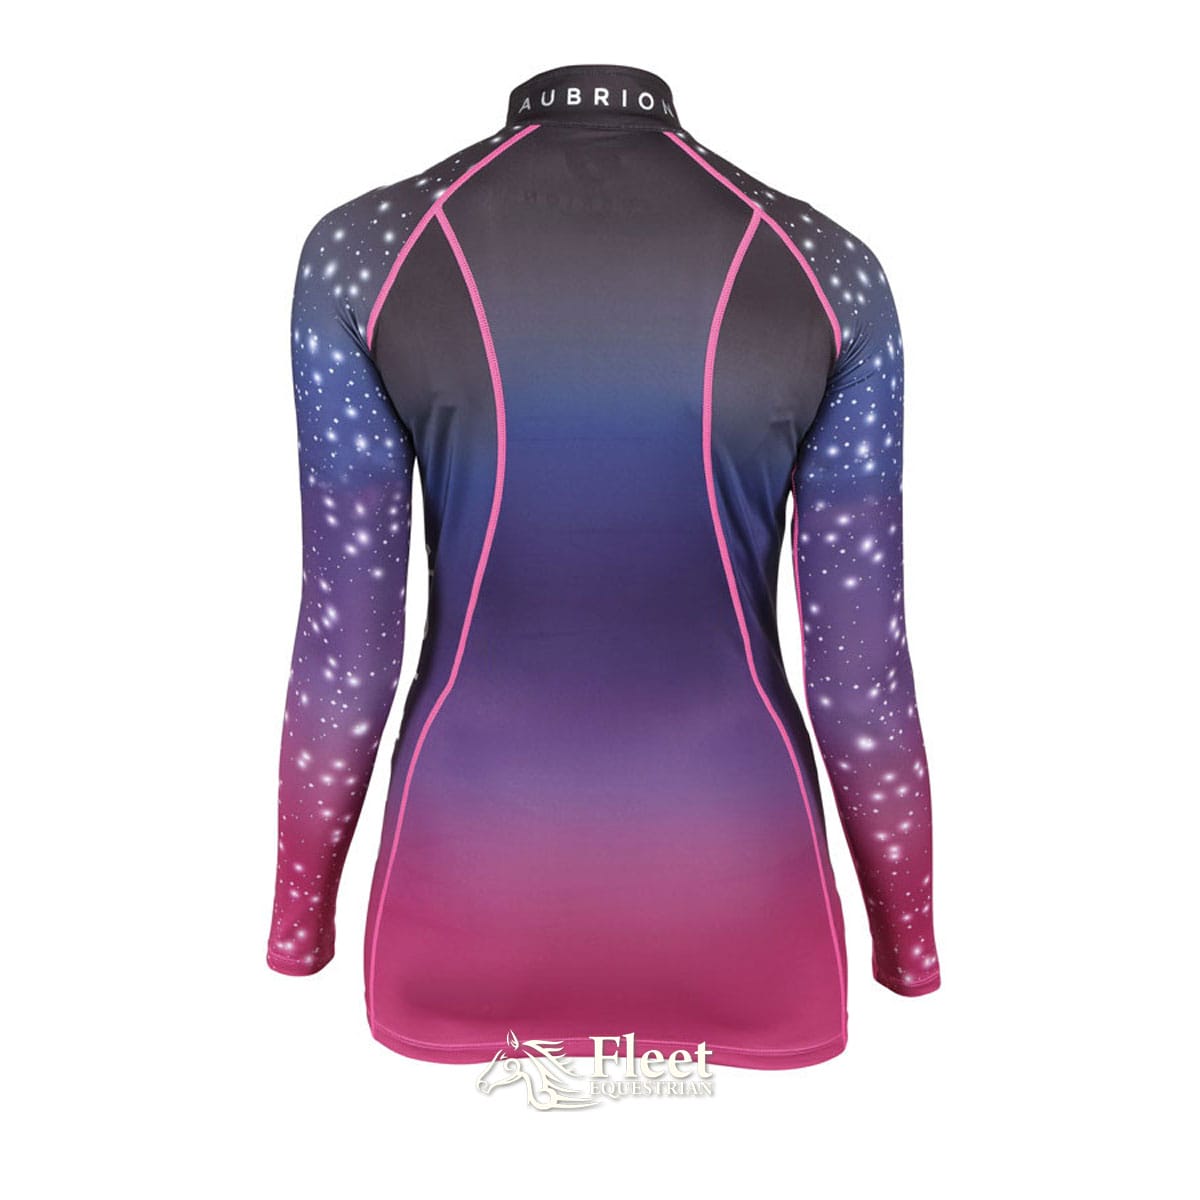 Shires Aubrion Hyde Park Baselayer viola Lightning Ladies XX-Small-Nuovo 